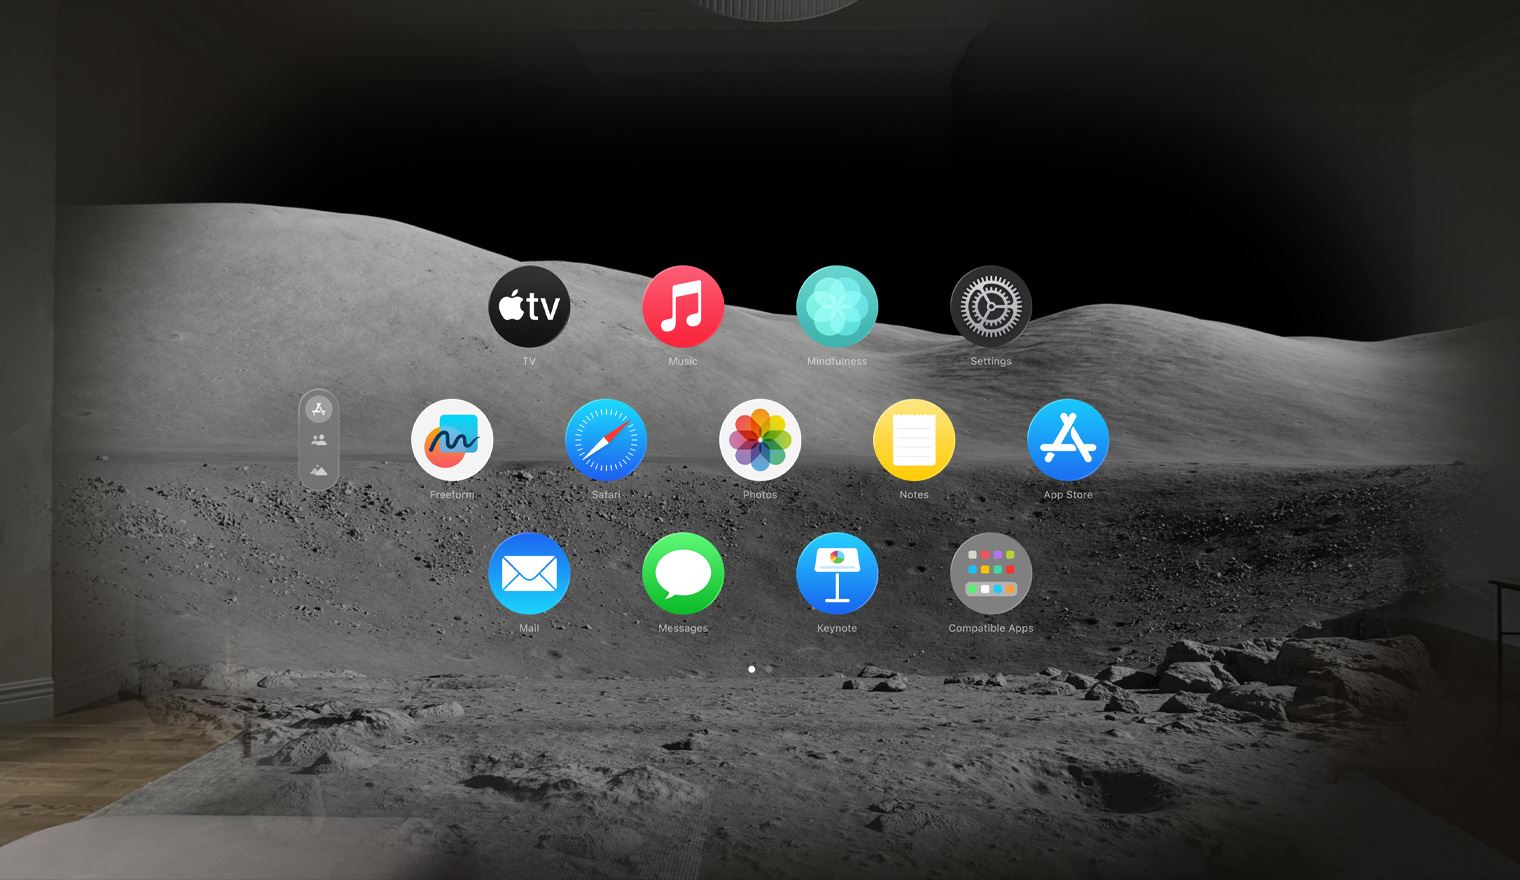 The Home Screen in the Moon Environment